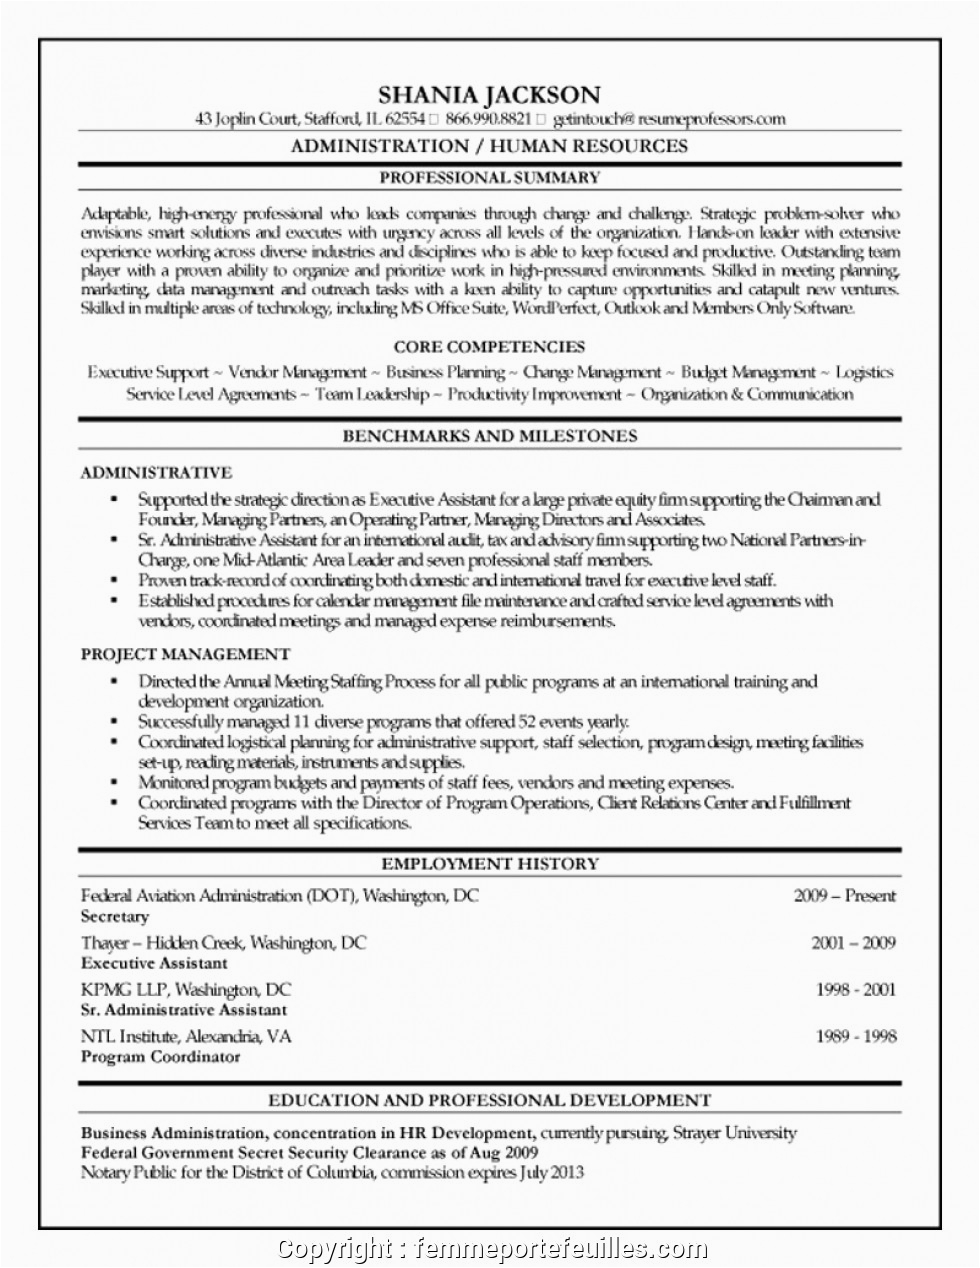 Human Resources Sample Resume Entry Level Simply Entry Level Human Resources Resume Entry Leve Entry